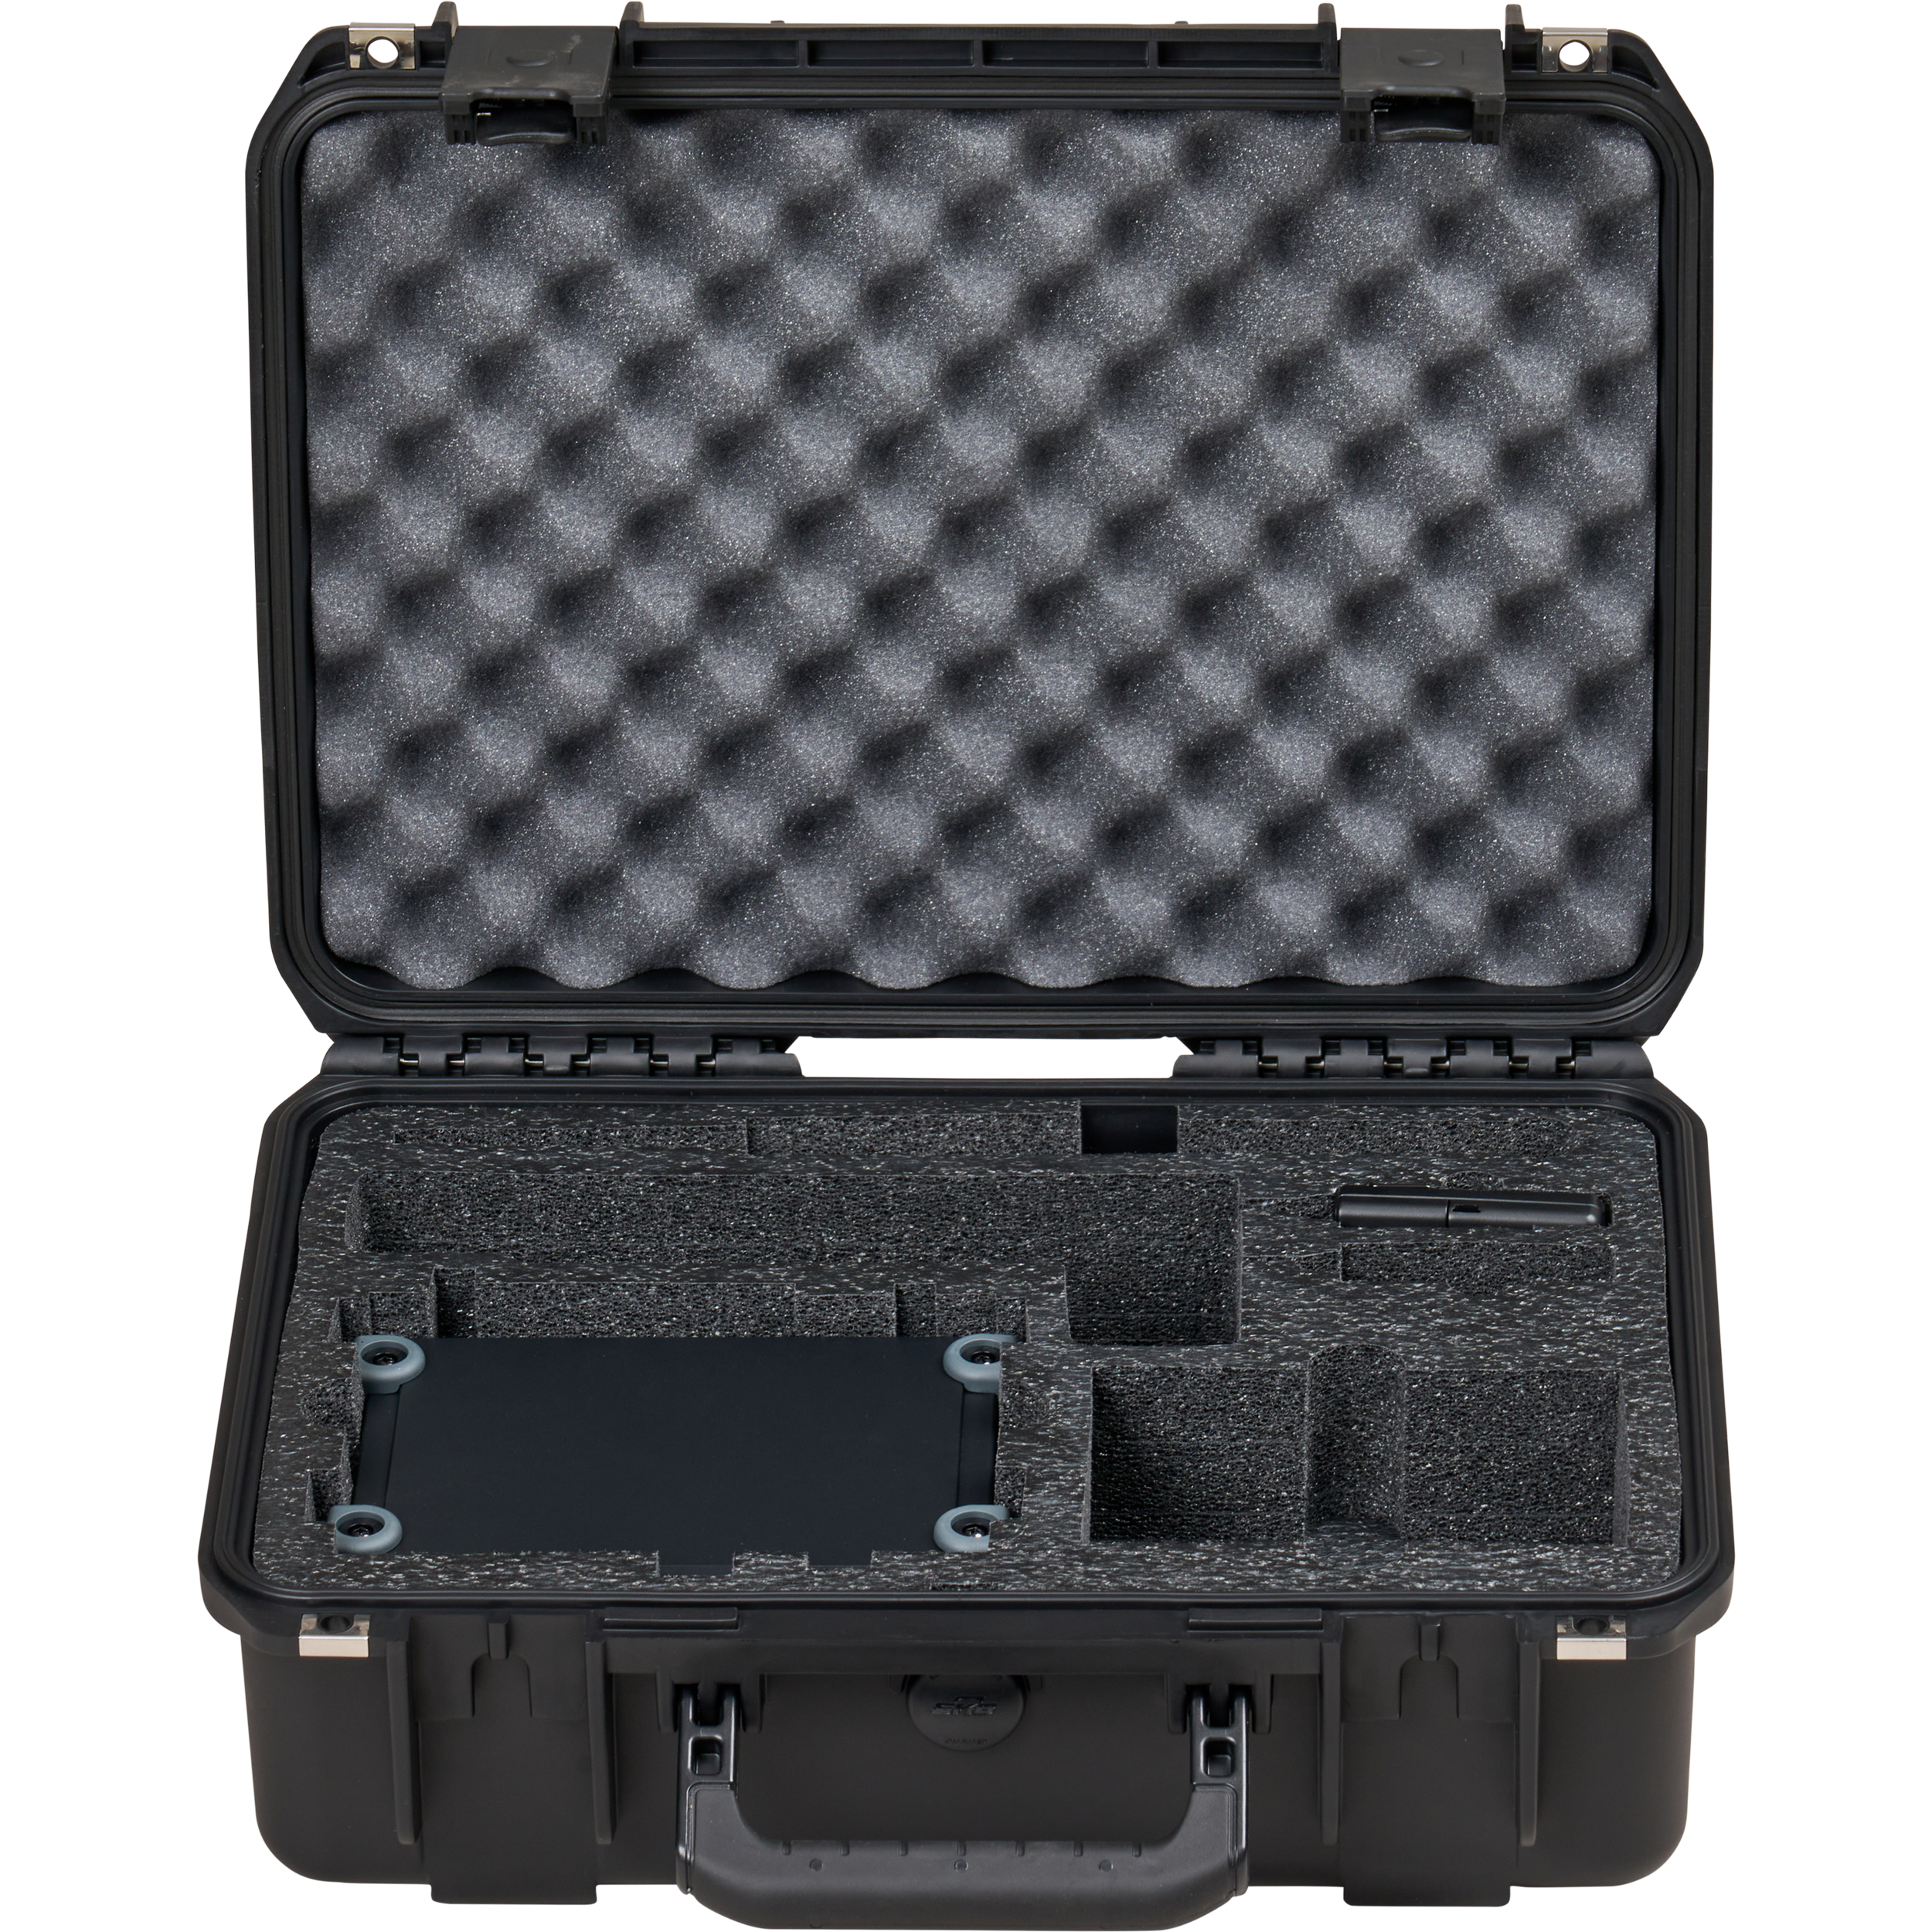 BYFP ipCase for Shure PSM900